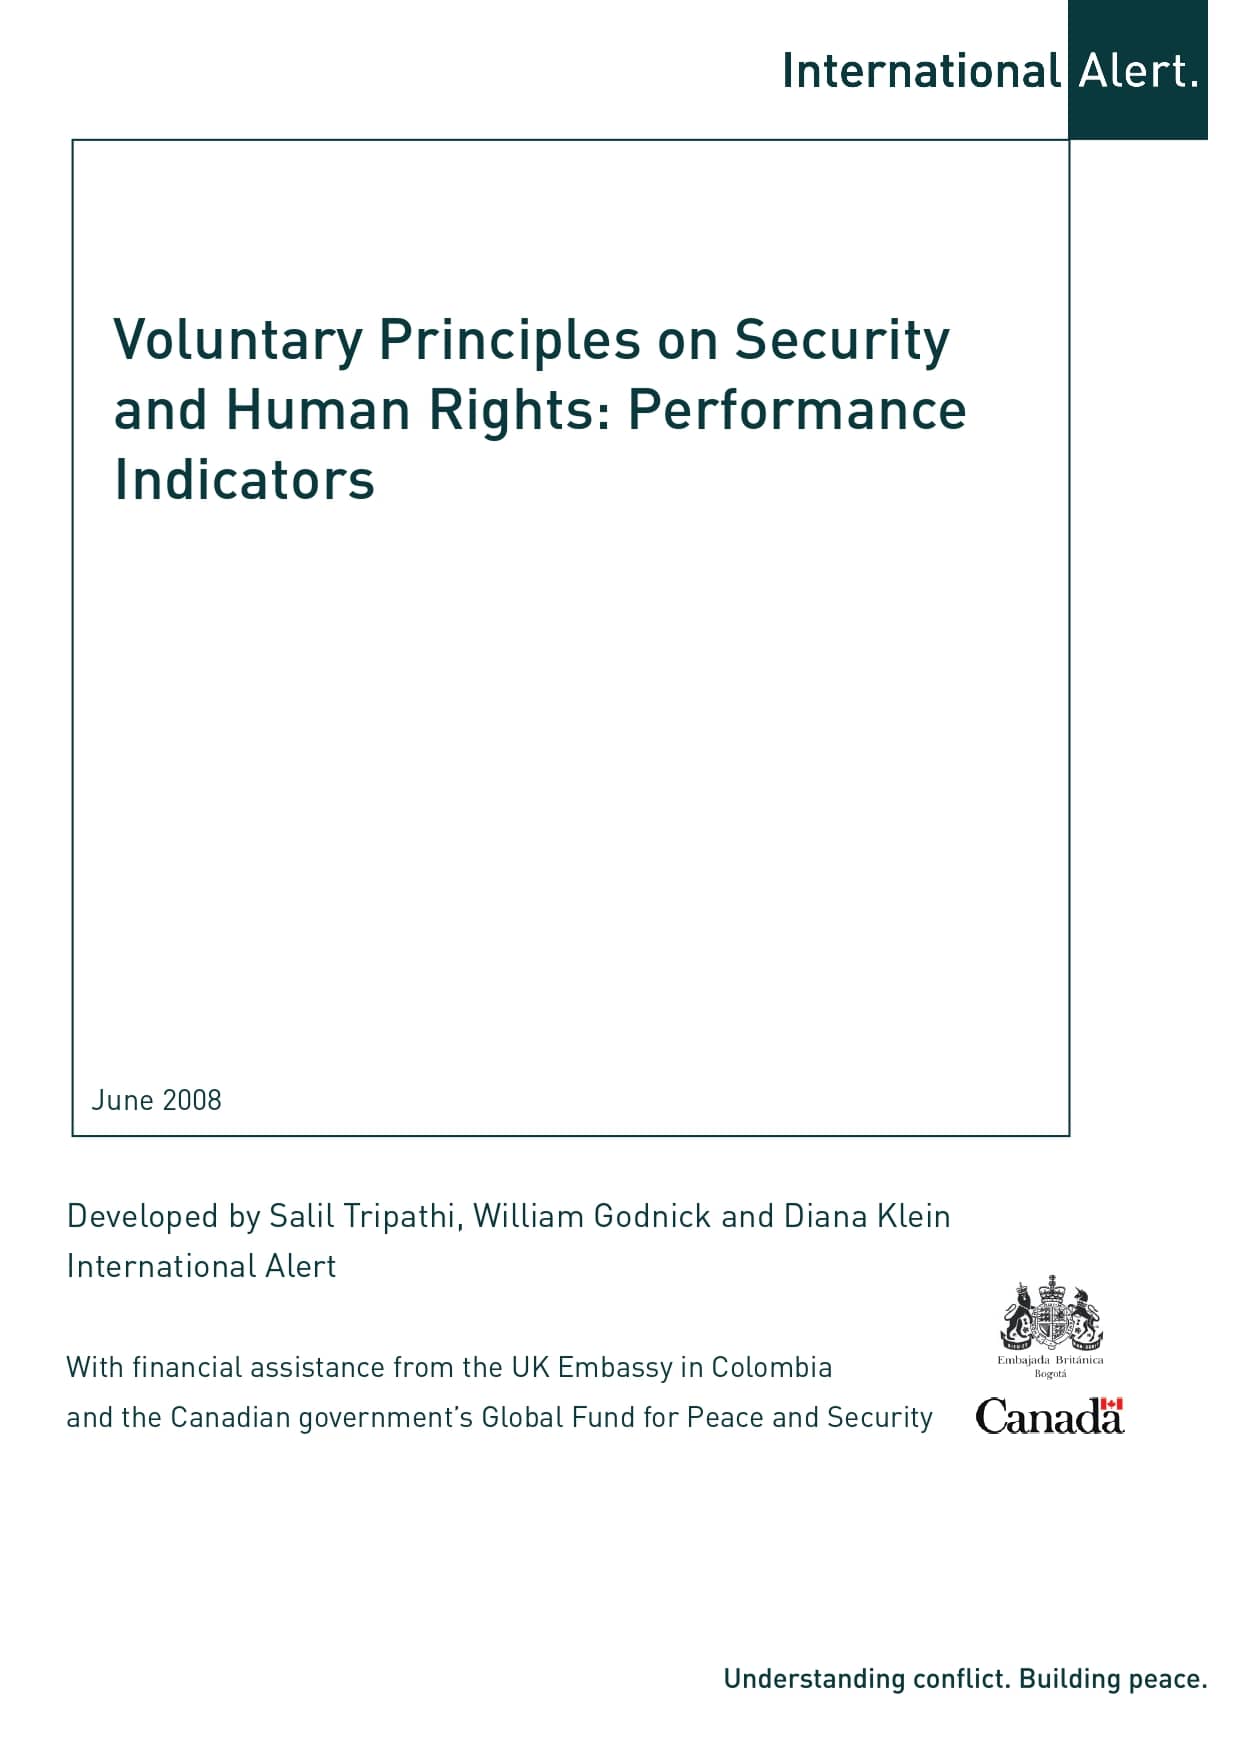 Voluntary Principles on Security and Human Rights: Performance Indicators